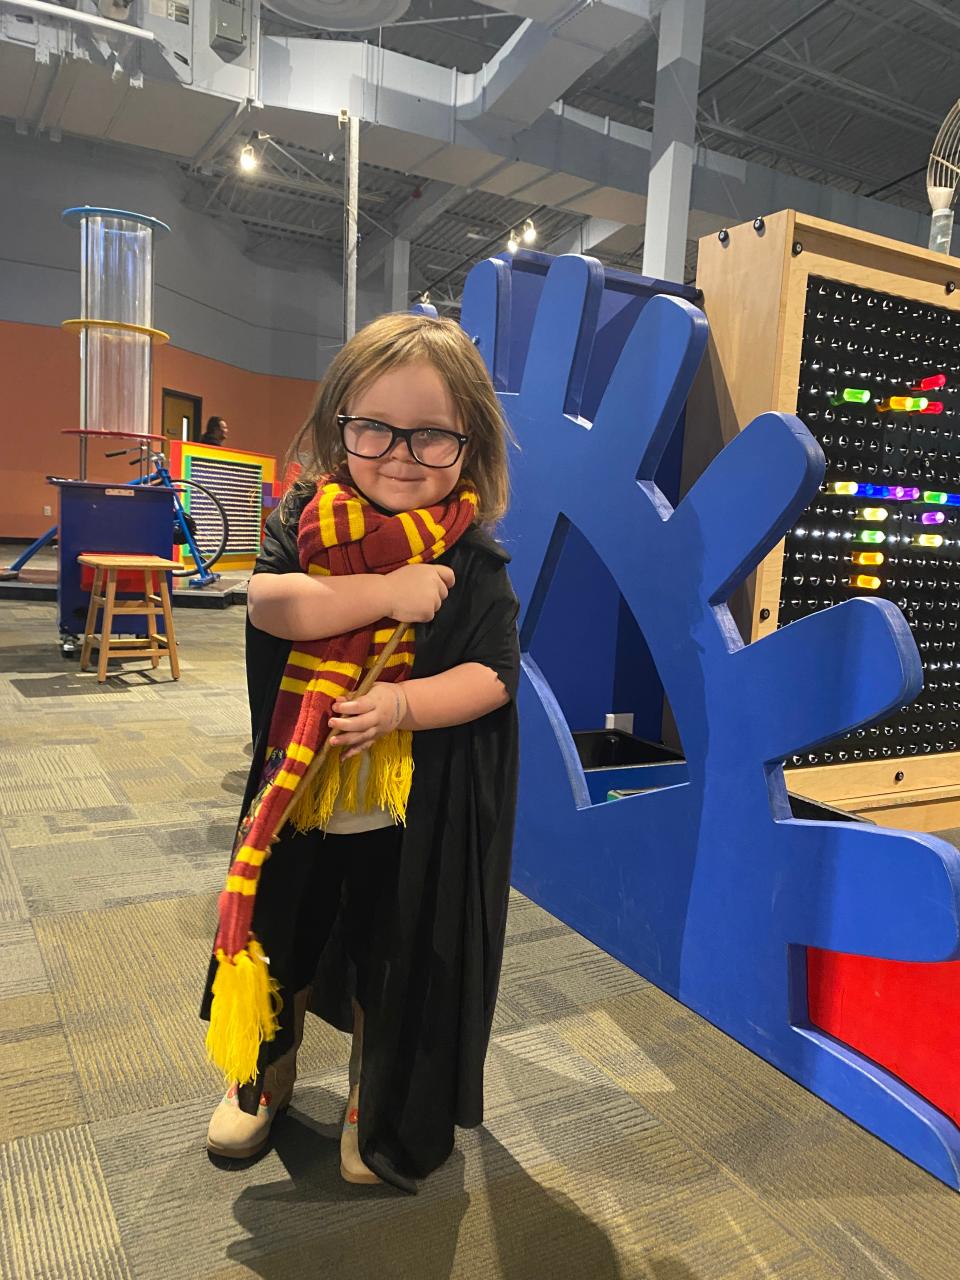 The Don Harrington Discovery Center invites all witches, wizards, magic and science lovers to join their Wizarding School for a day full of magic lessons. The event includes two available time slots, 10:00 a.m. and 12:30 a.m., on Saturday, July 29 at the Discovery Center.